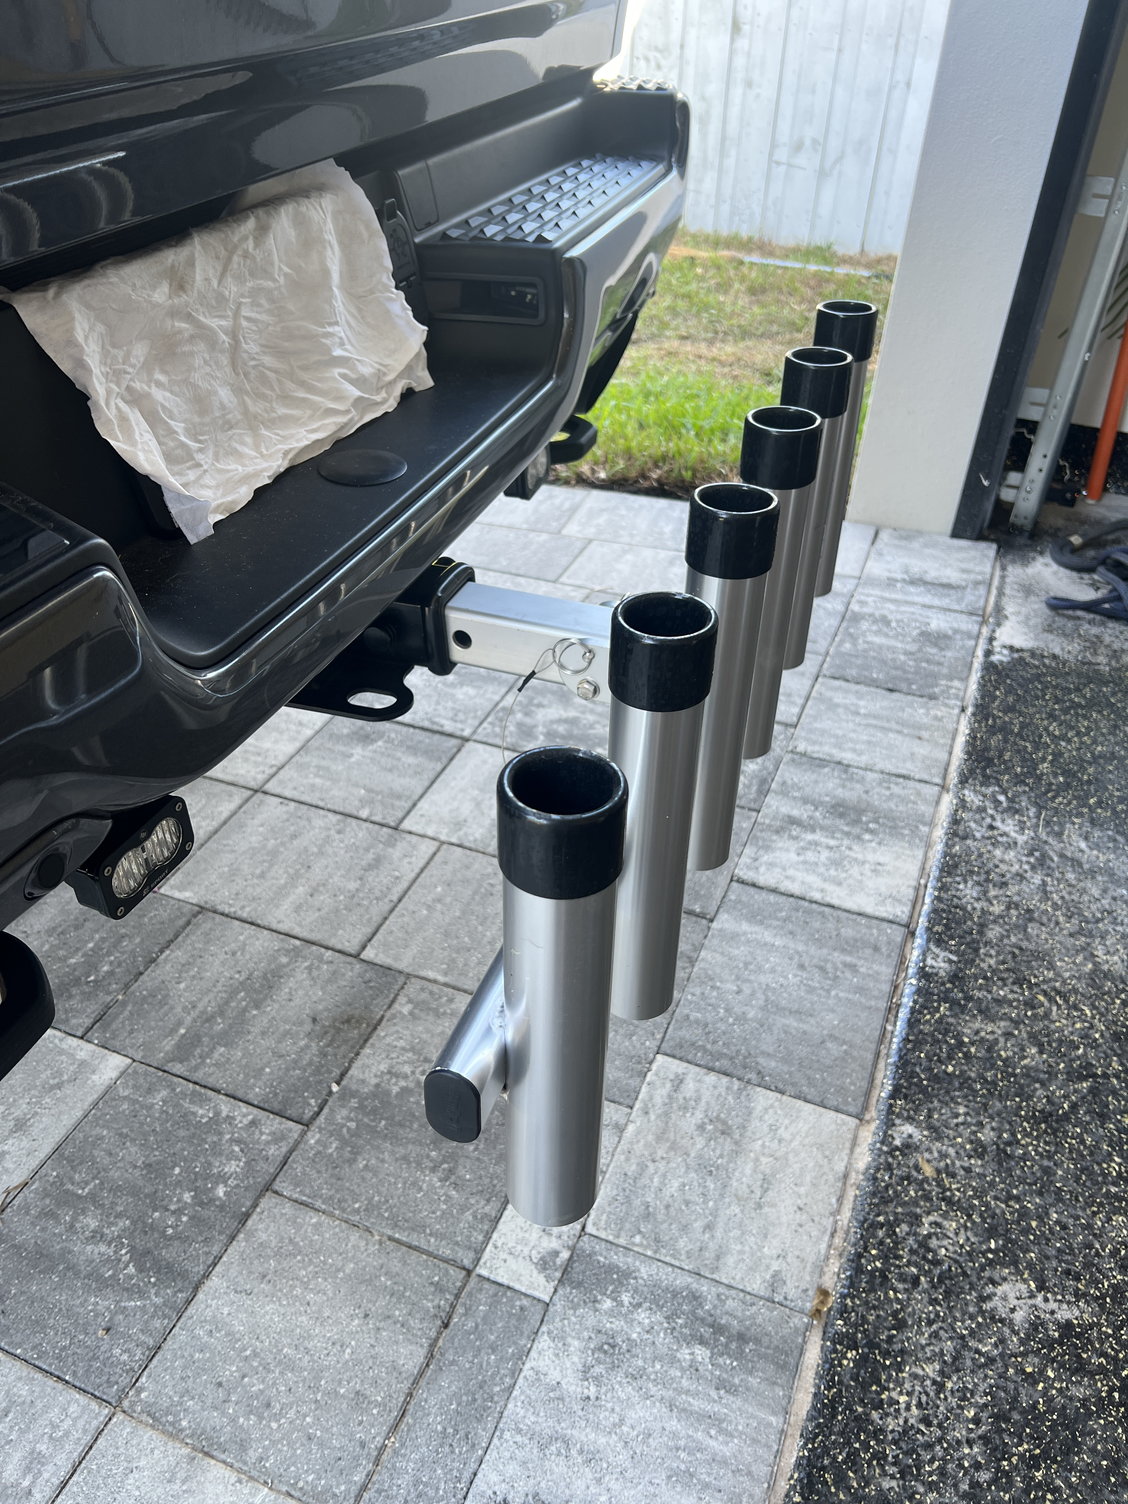 Rod holders for pickup trucks - The Hull Truth - Boating and